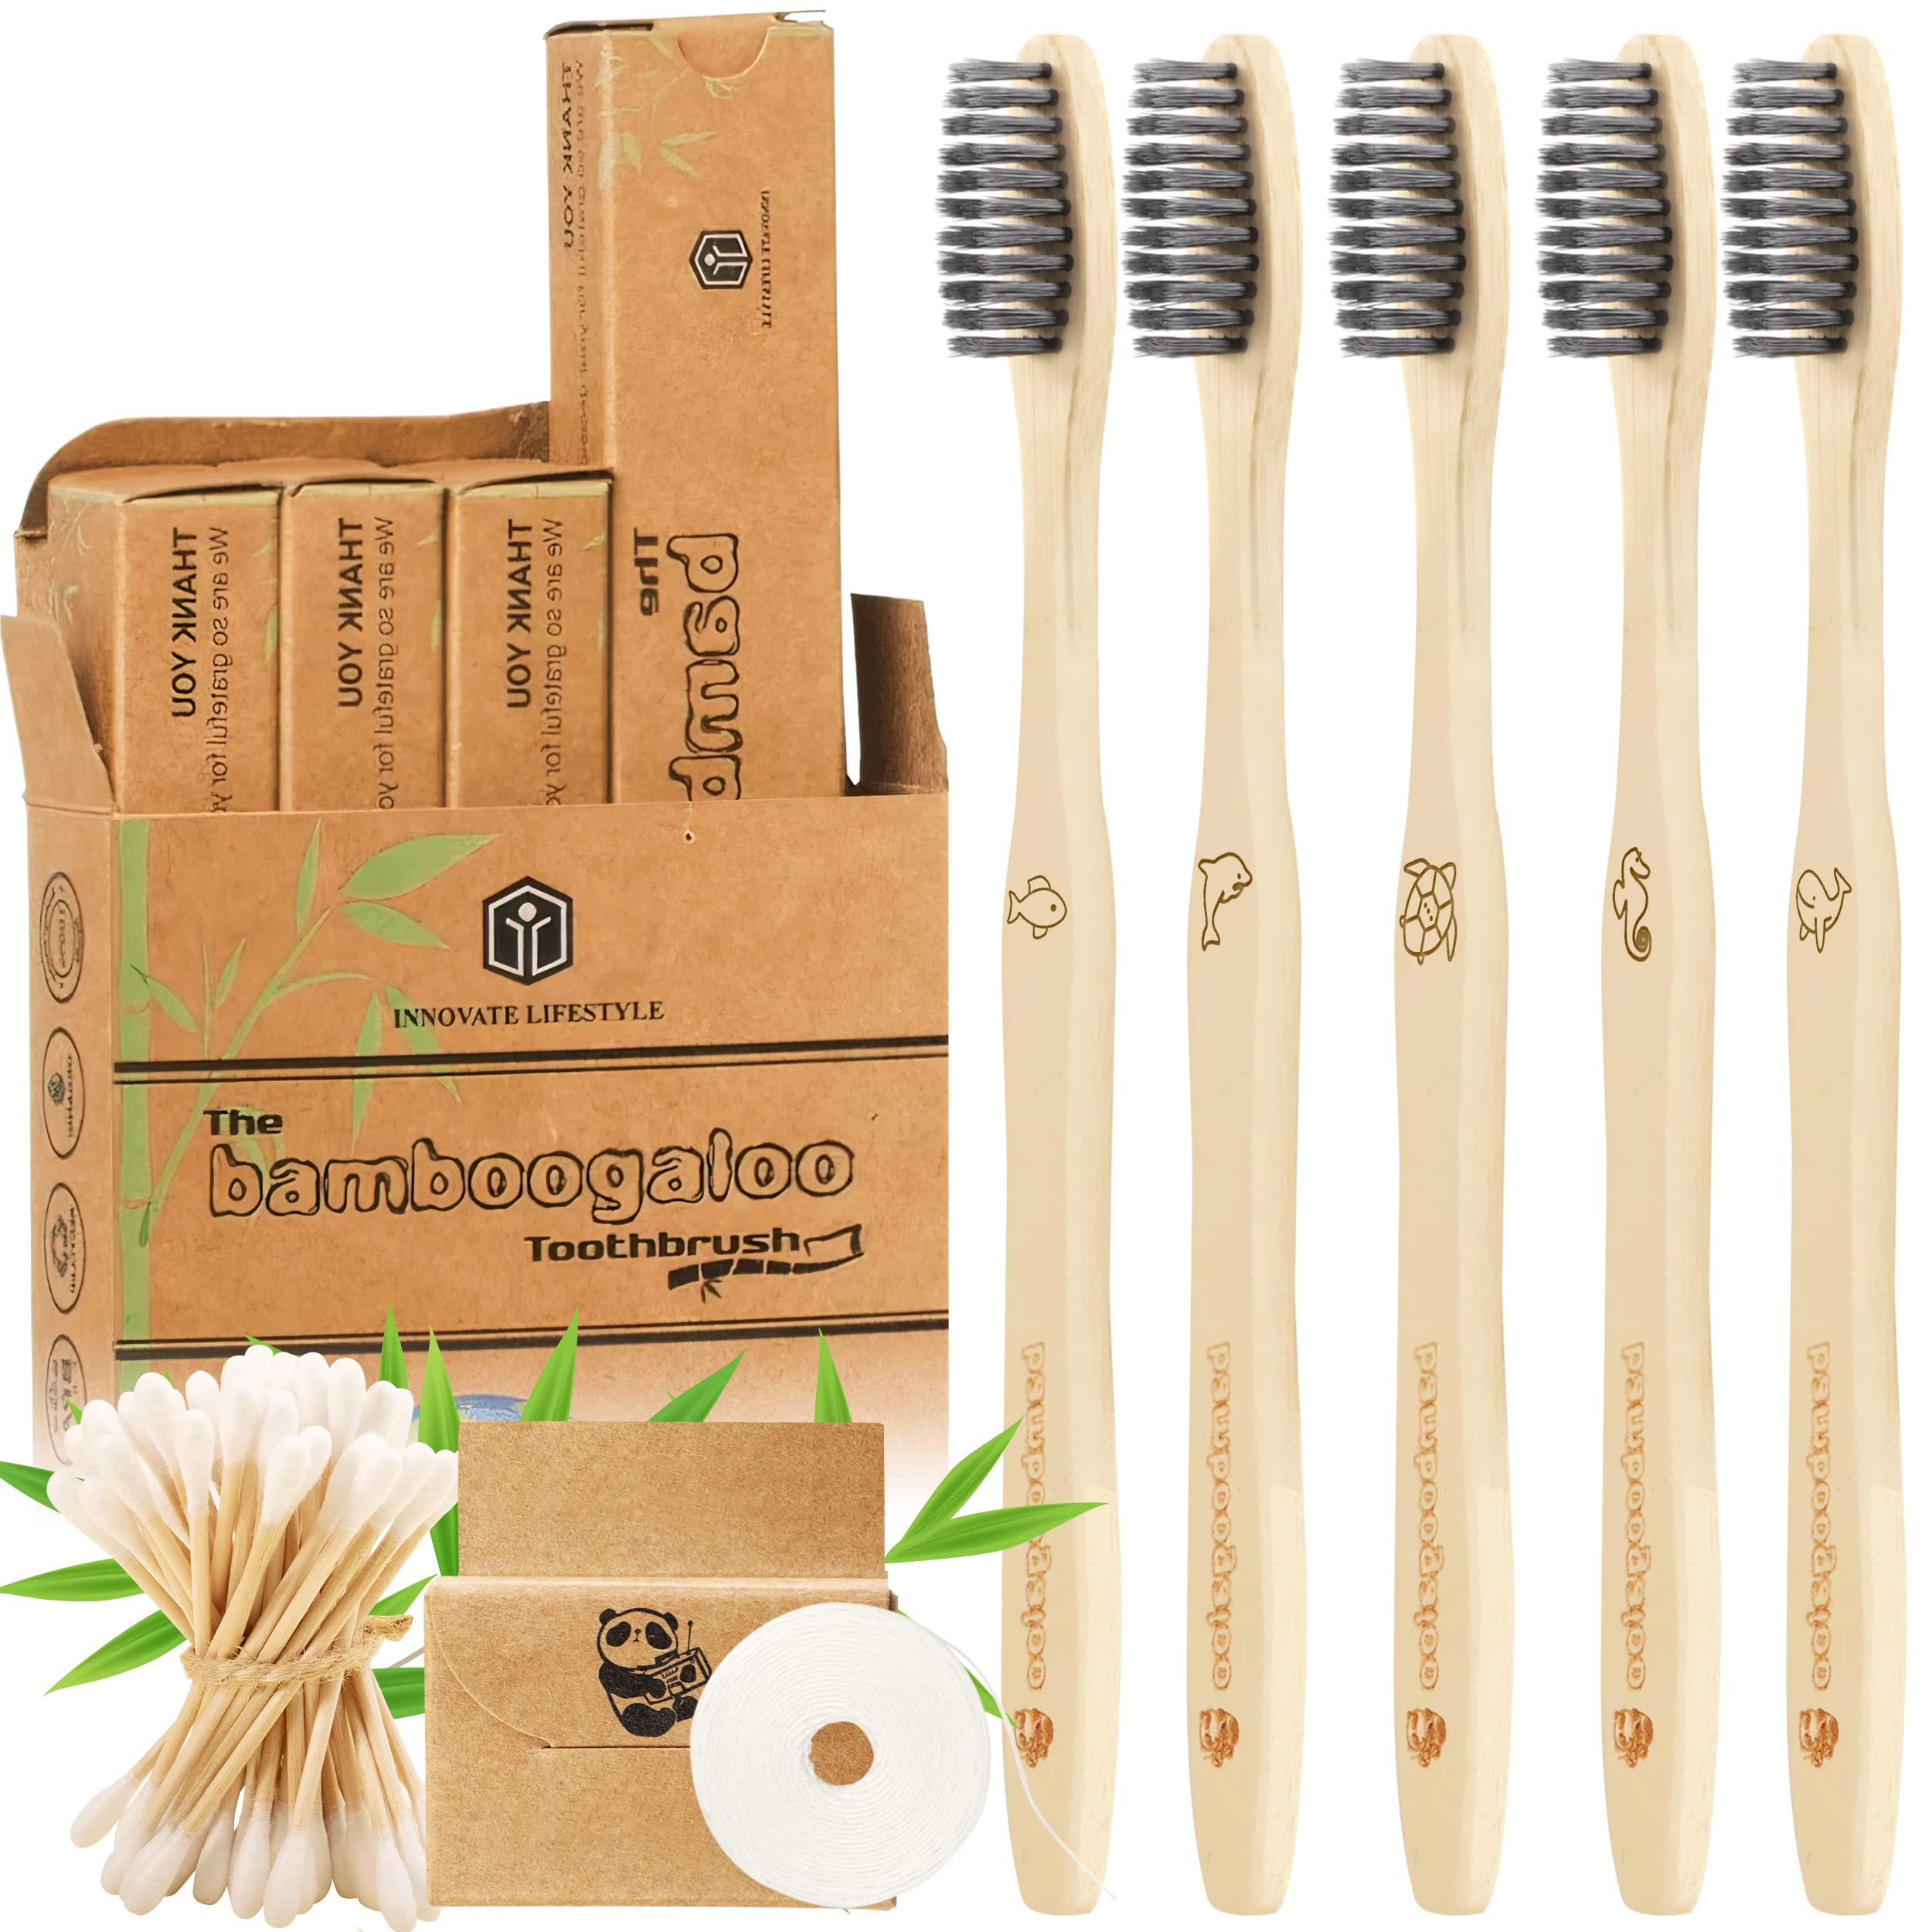 Bamboogaloo Charcoal Bamboo ECO Dent Toothbrushes - Natural Wood Organic Cotton Buds & Dental Floss - Biodegradable - Medium Firm Bristles - 5 Pack